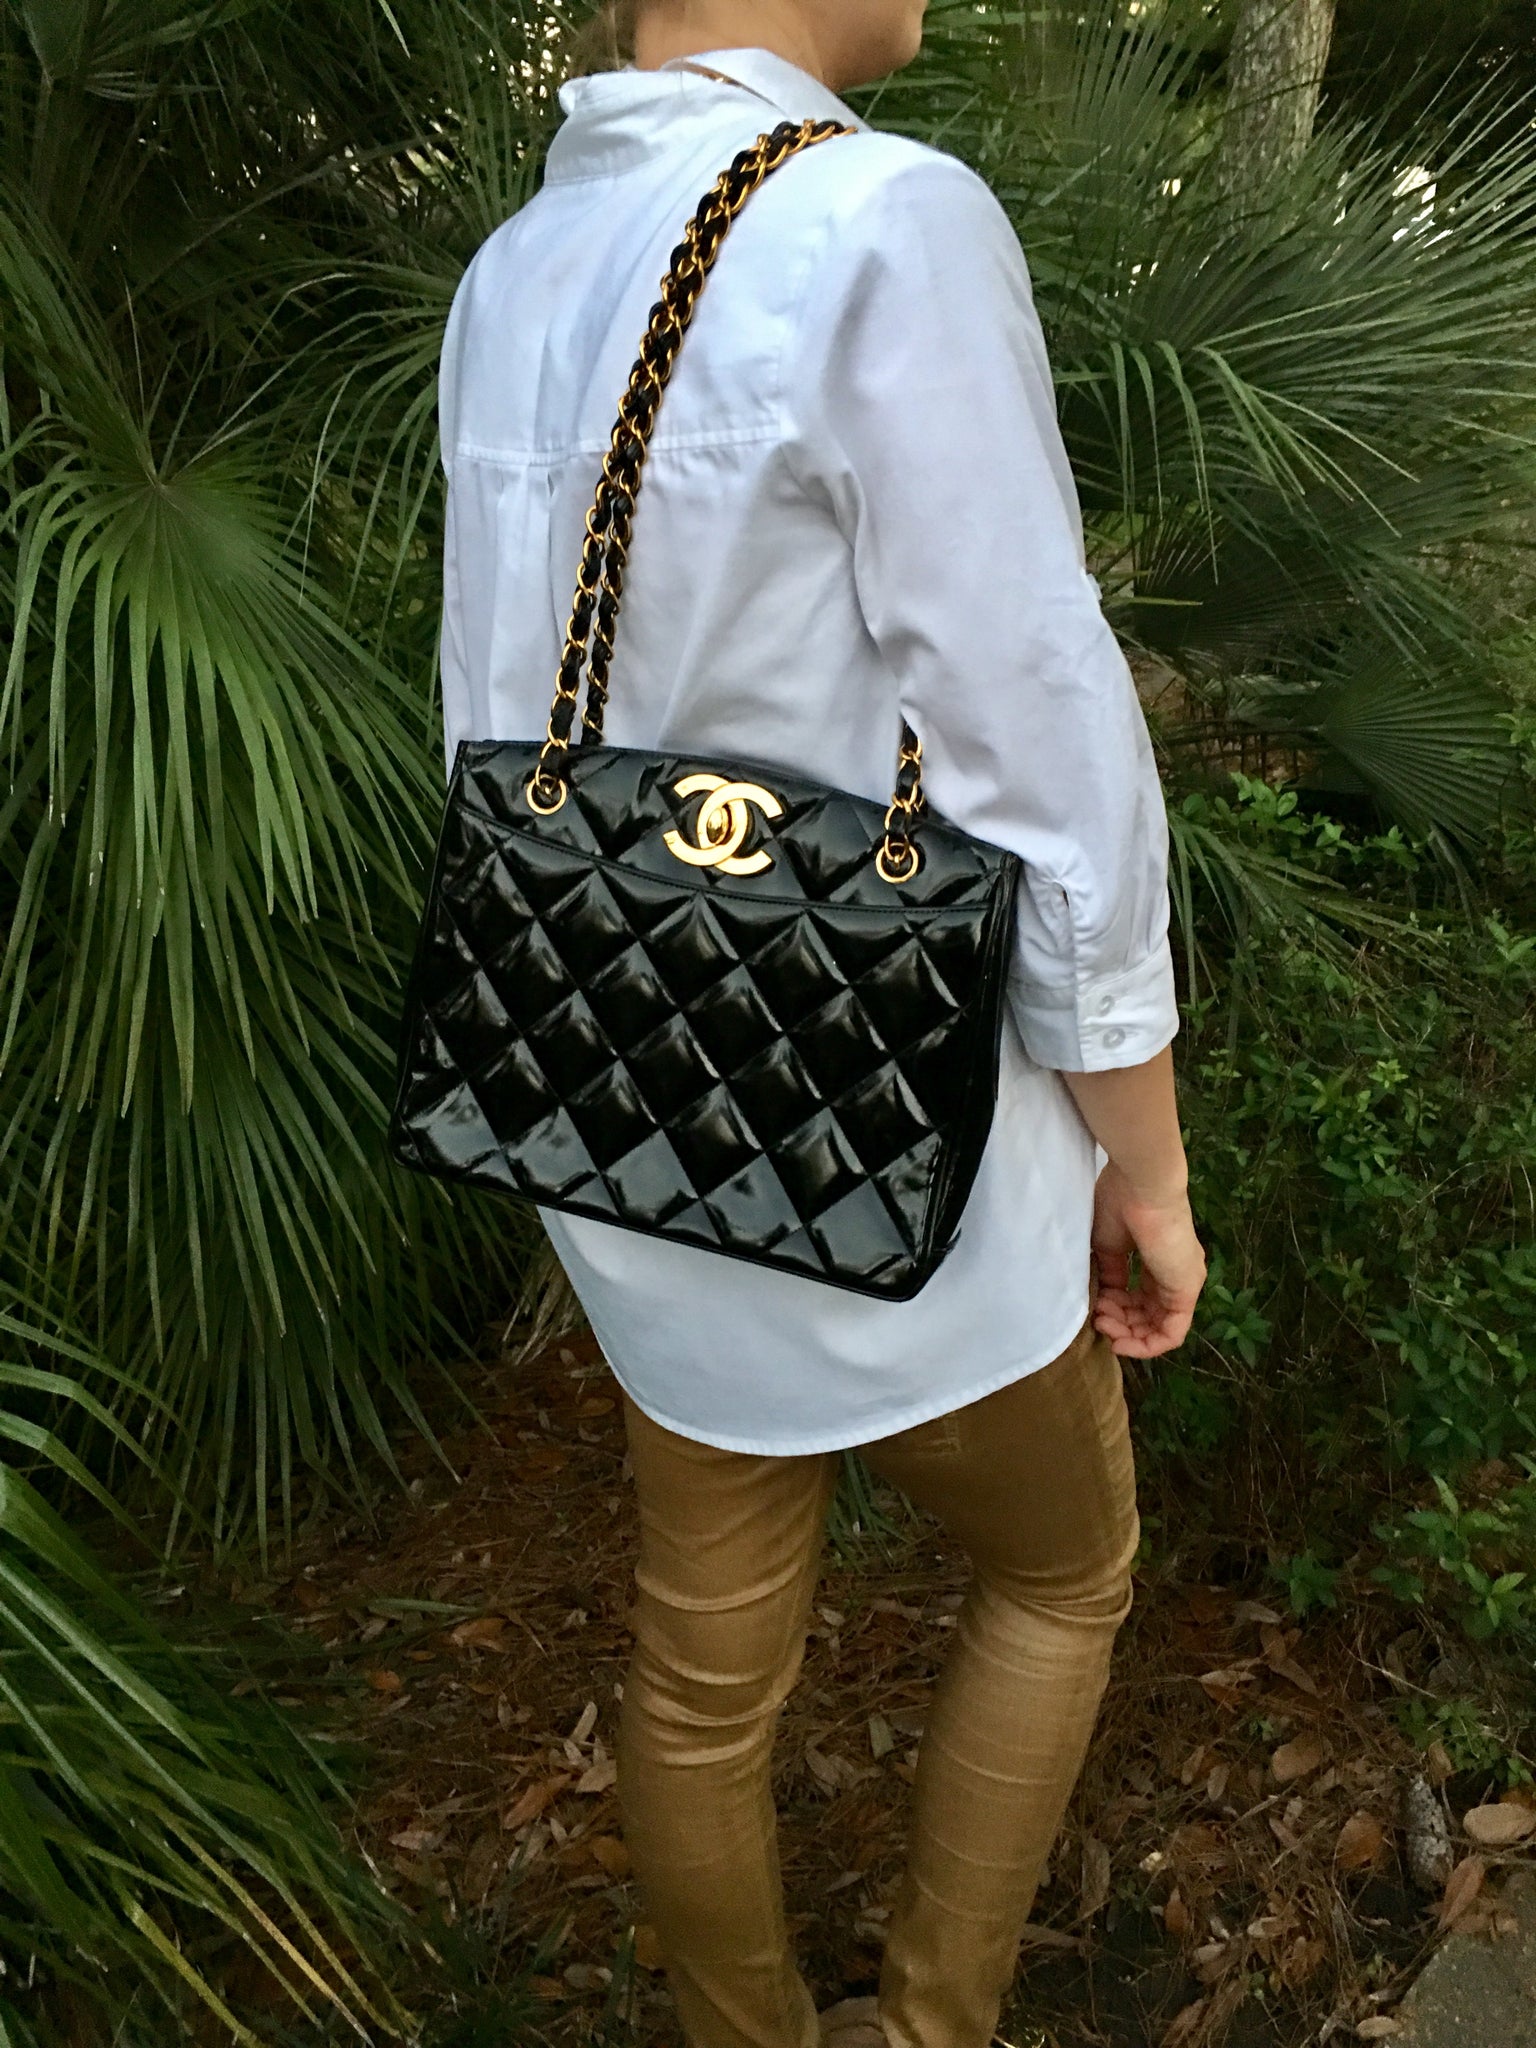 CHANEL Black Patent Leather Quilted Bag